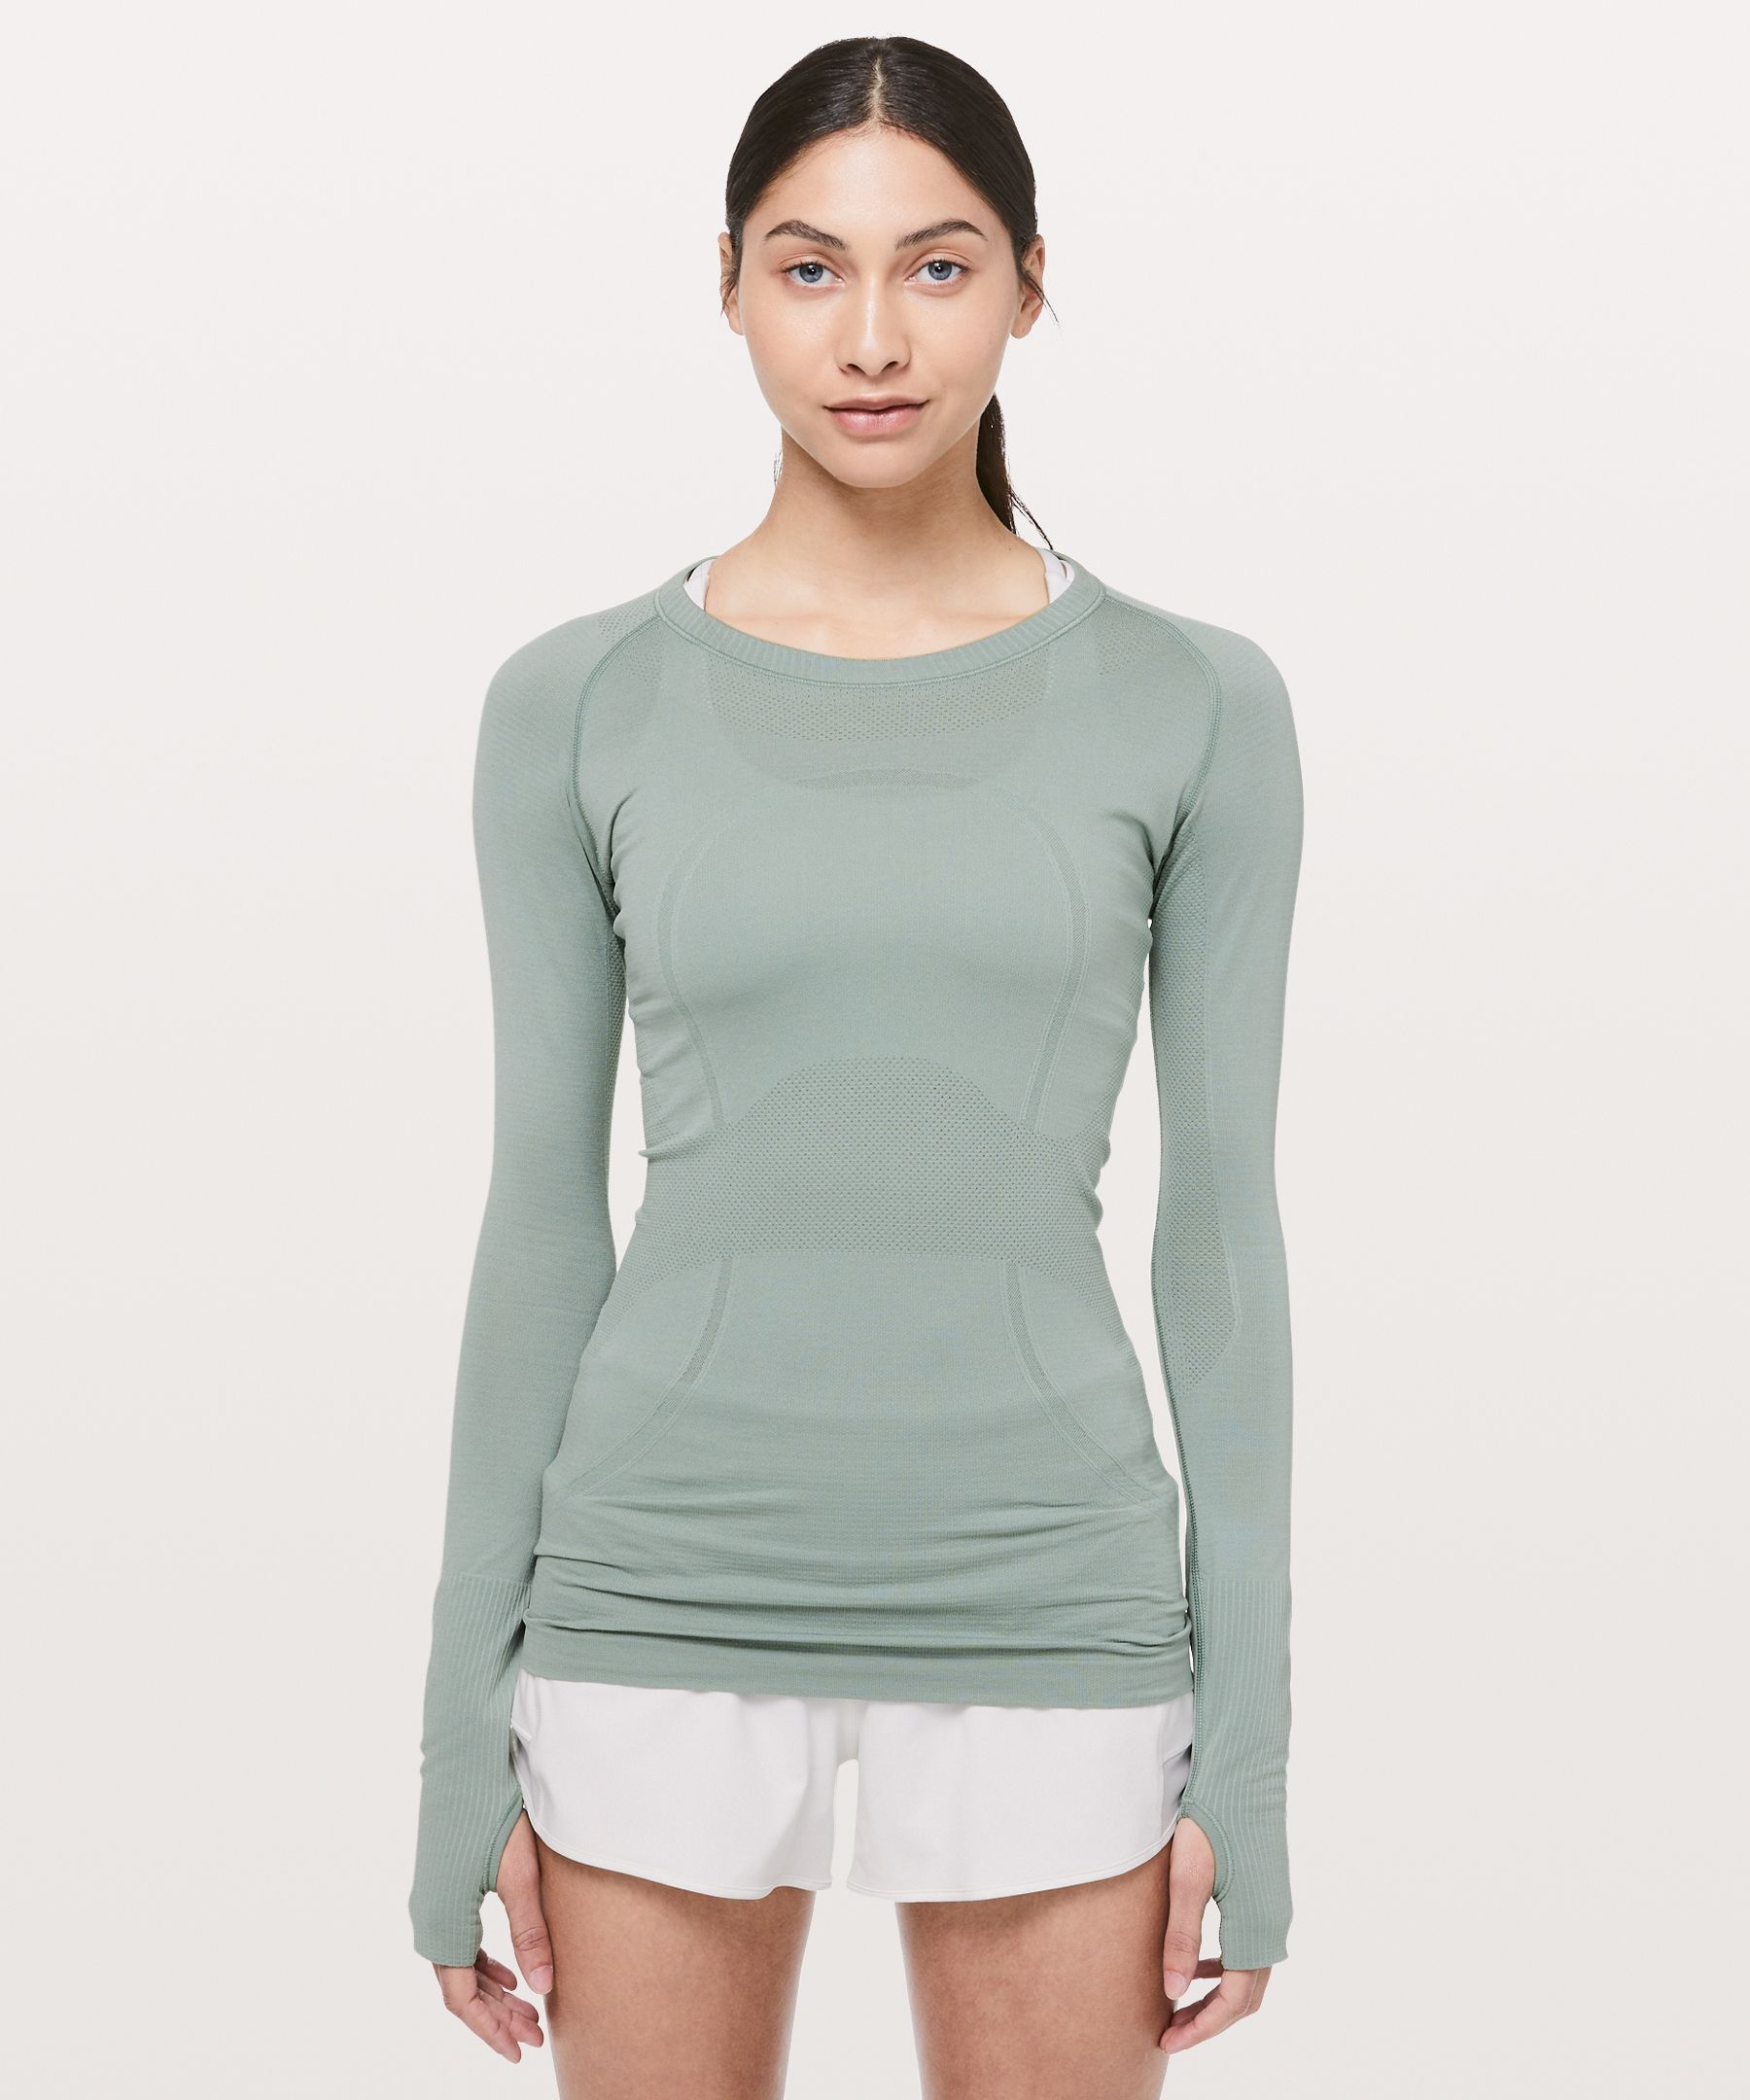 Lululemon Swiftly Tech Long Sleeve Crew In Palm Court/palm Court